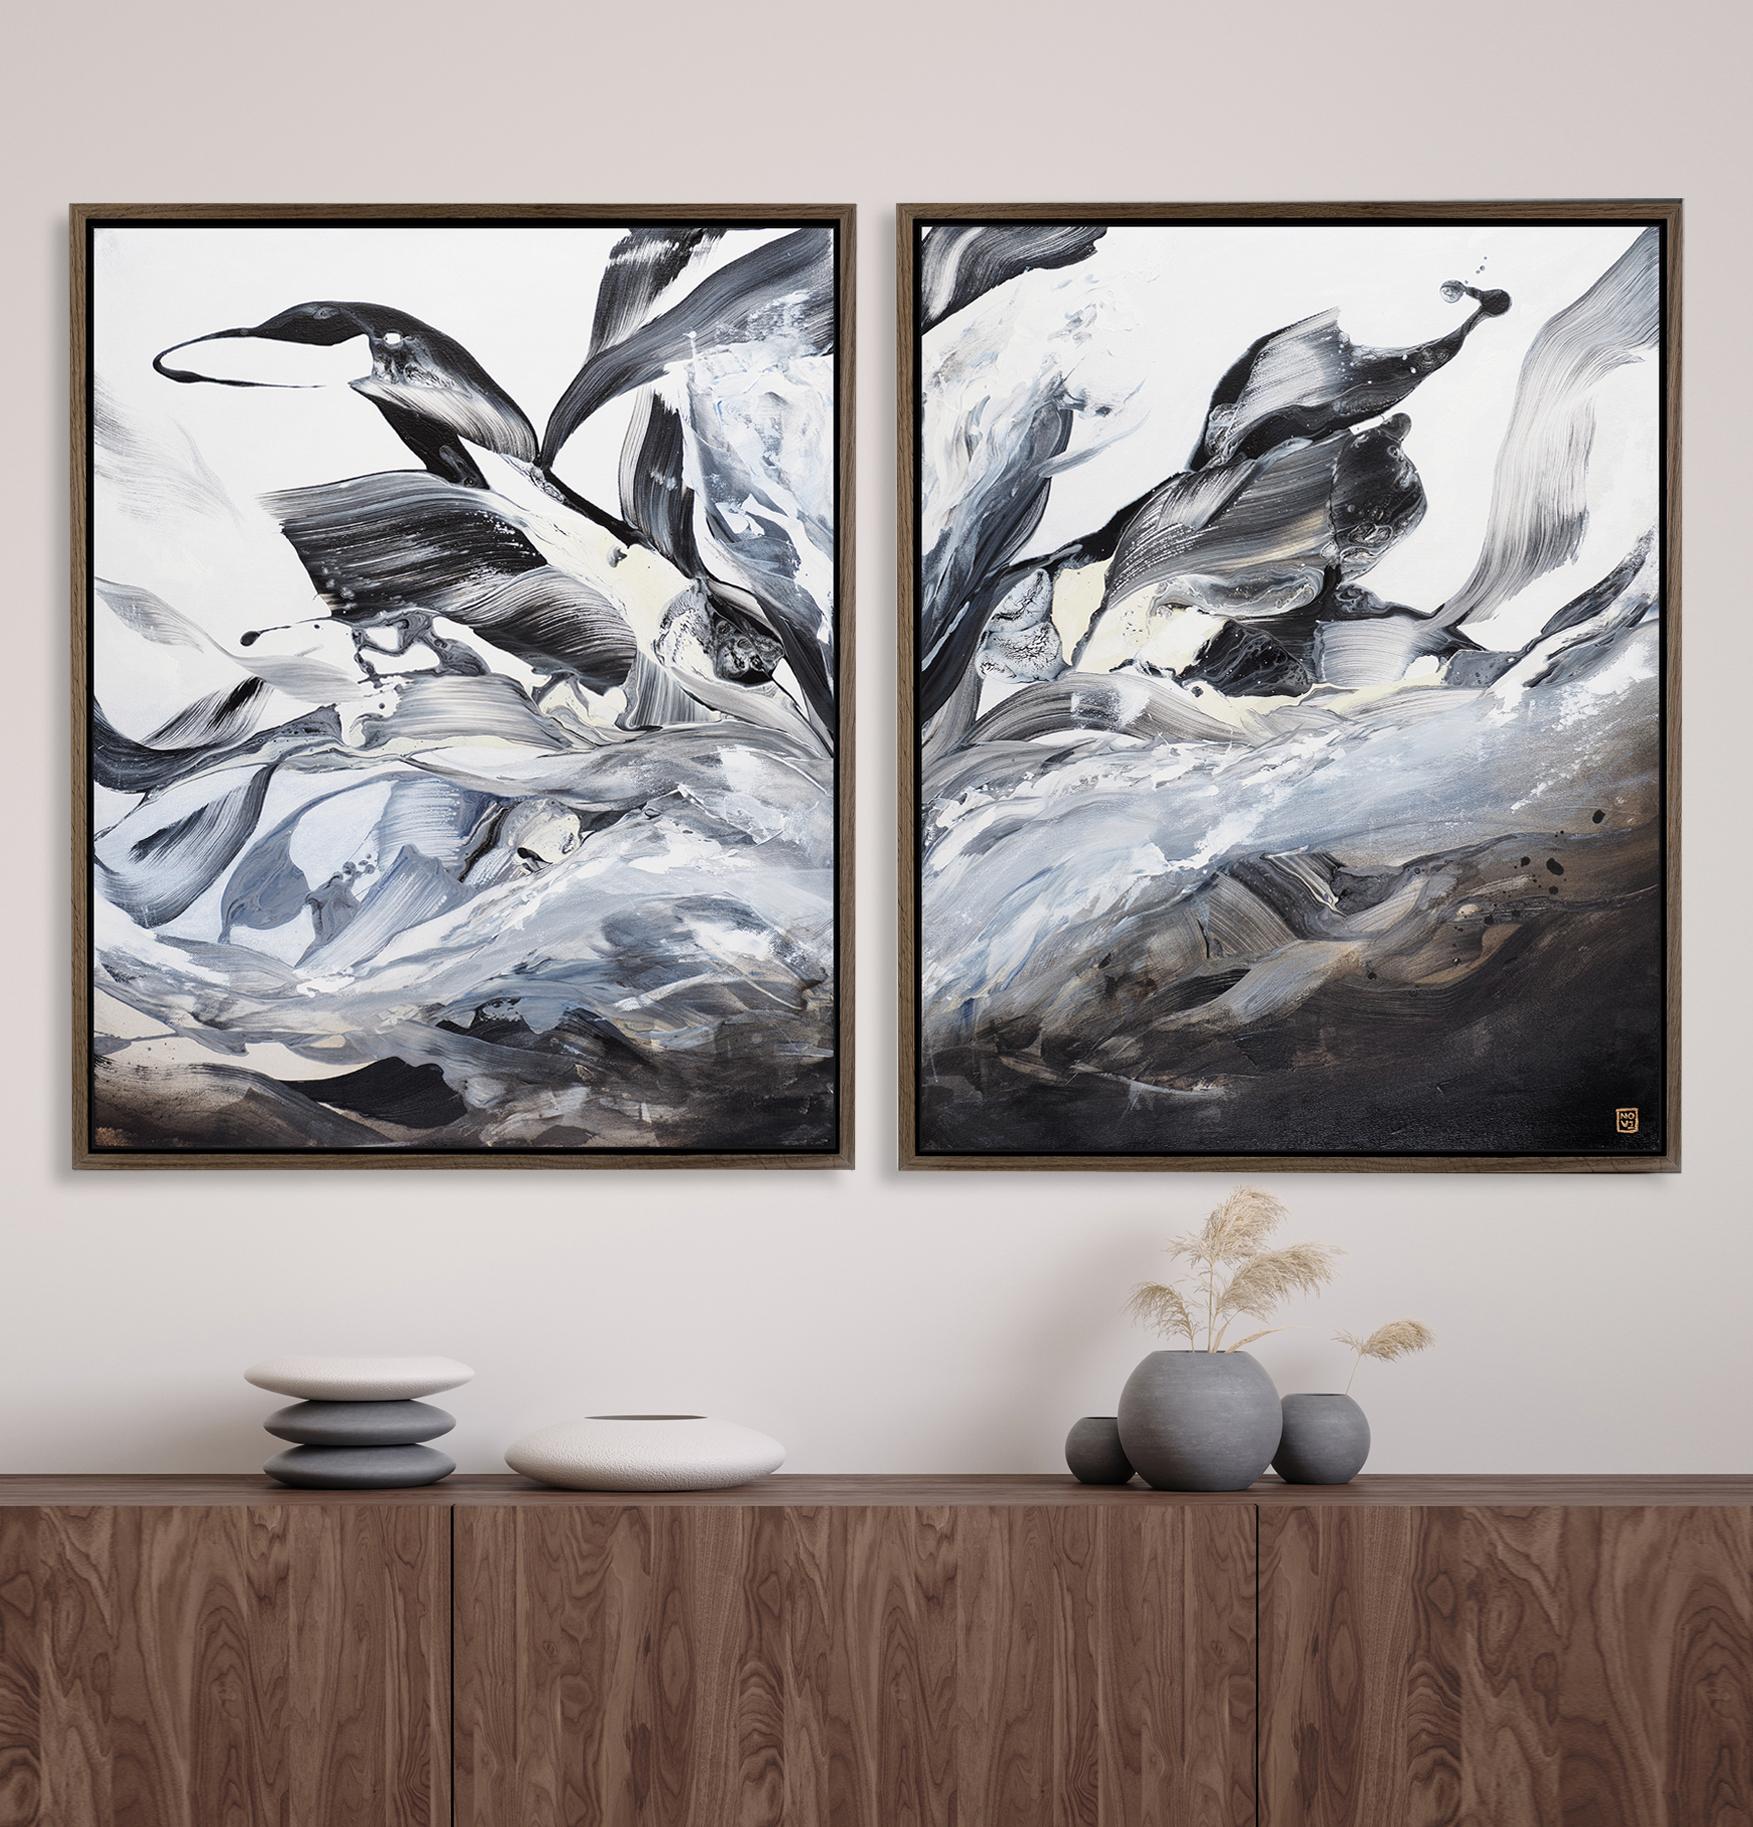 Details:
- This is a diptych and consists of 2 complimentary pieces
- Natural oak floating frame included. Each piece is 32 x 26 x 2 inches  (framed)
- This is a hand painted, original painting
- Created in North Carolina, USA
- Professional grade